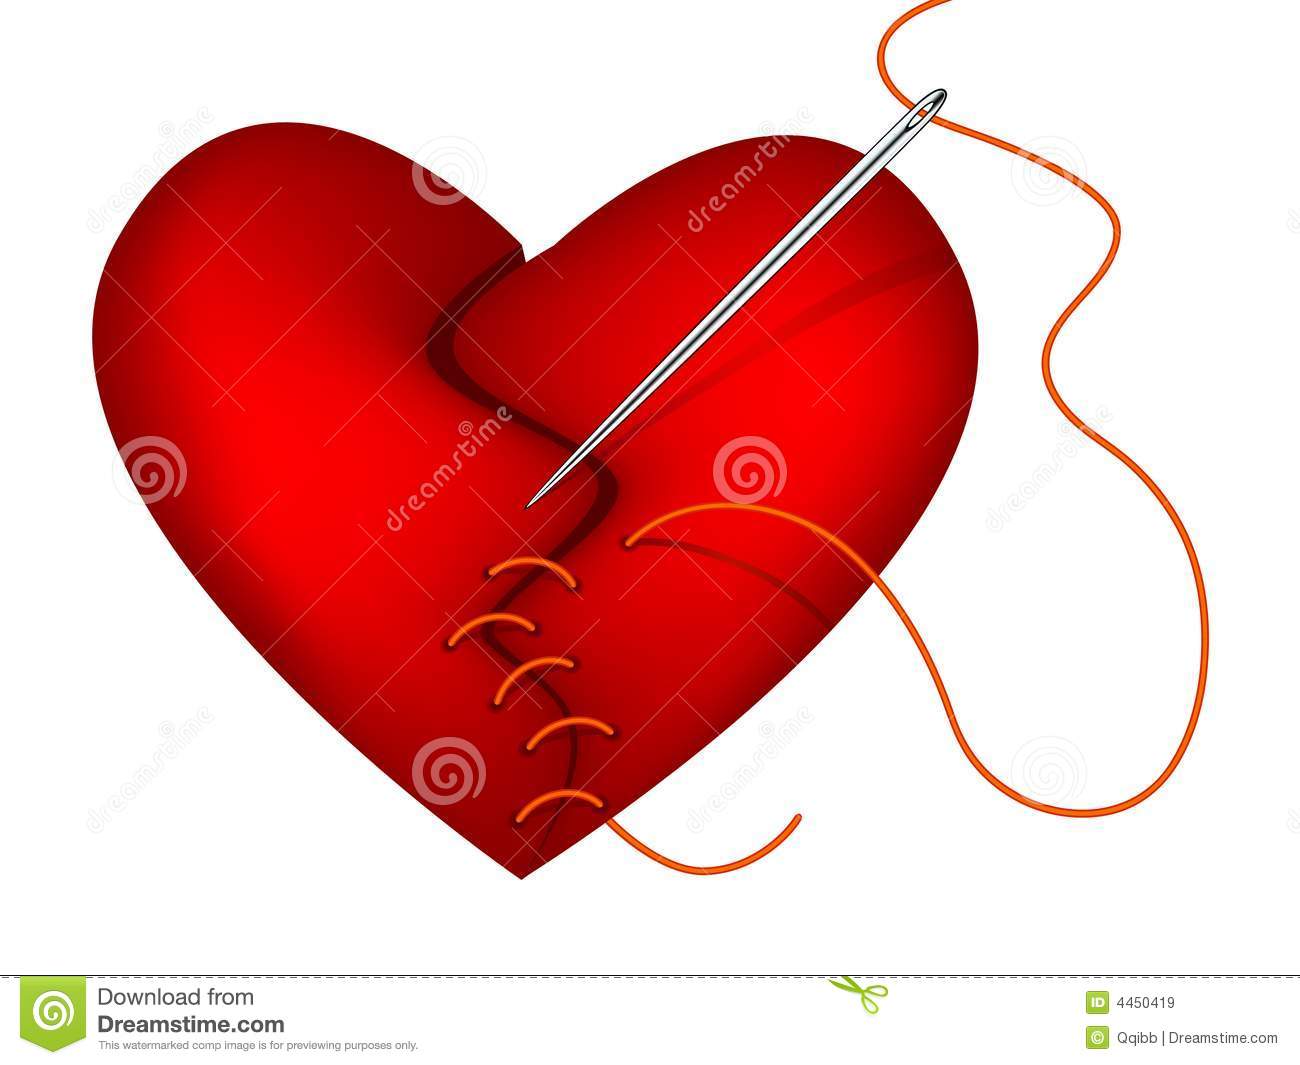 Clip Art Of Broken Heart And Needle Royalty Free Stock Images   Image